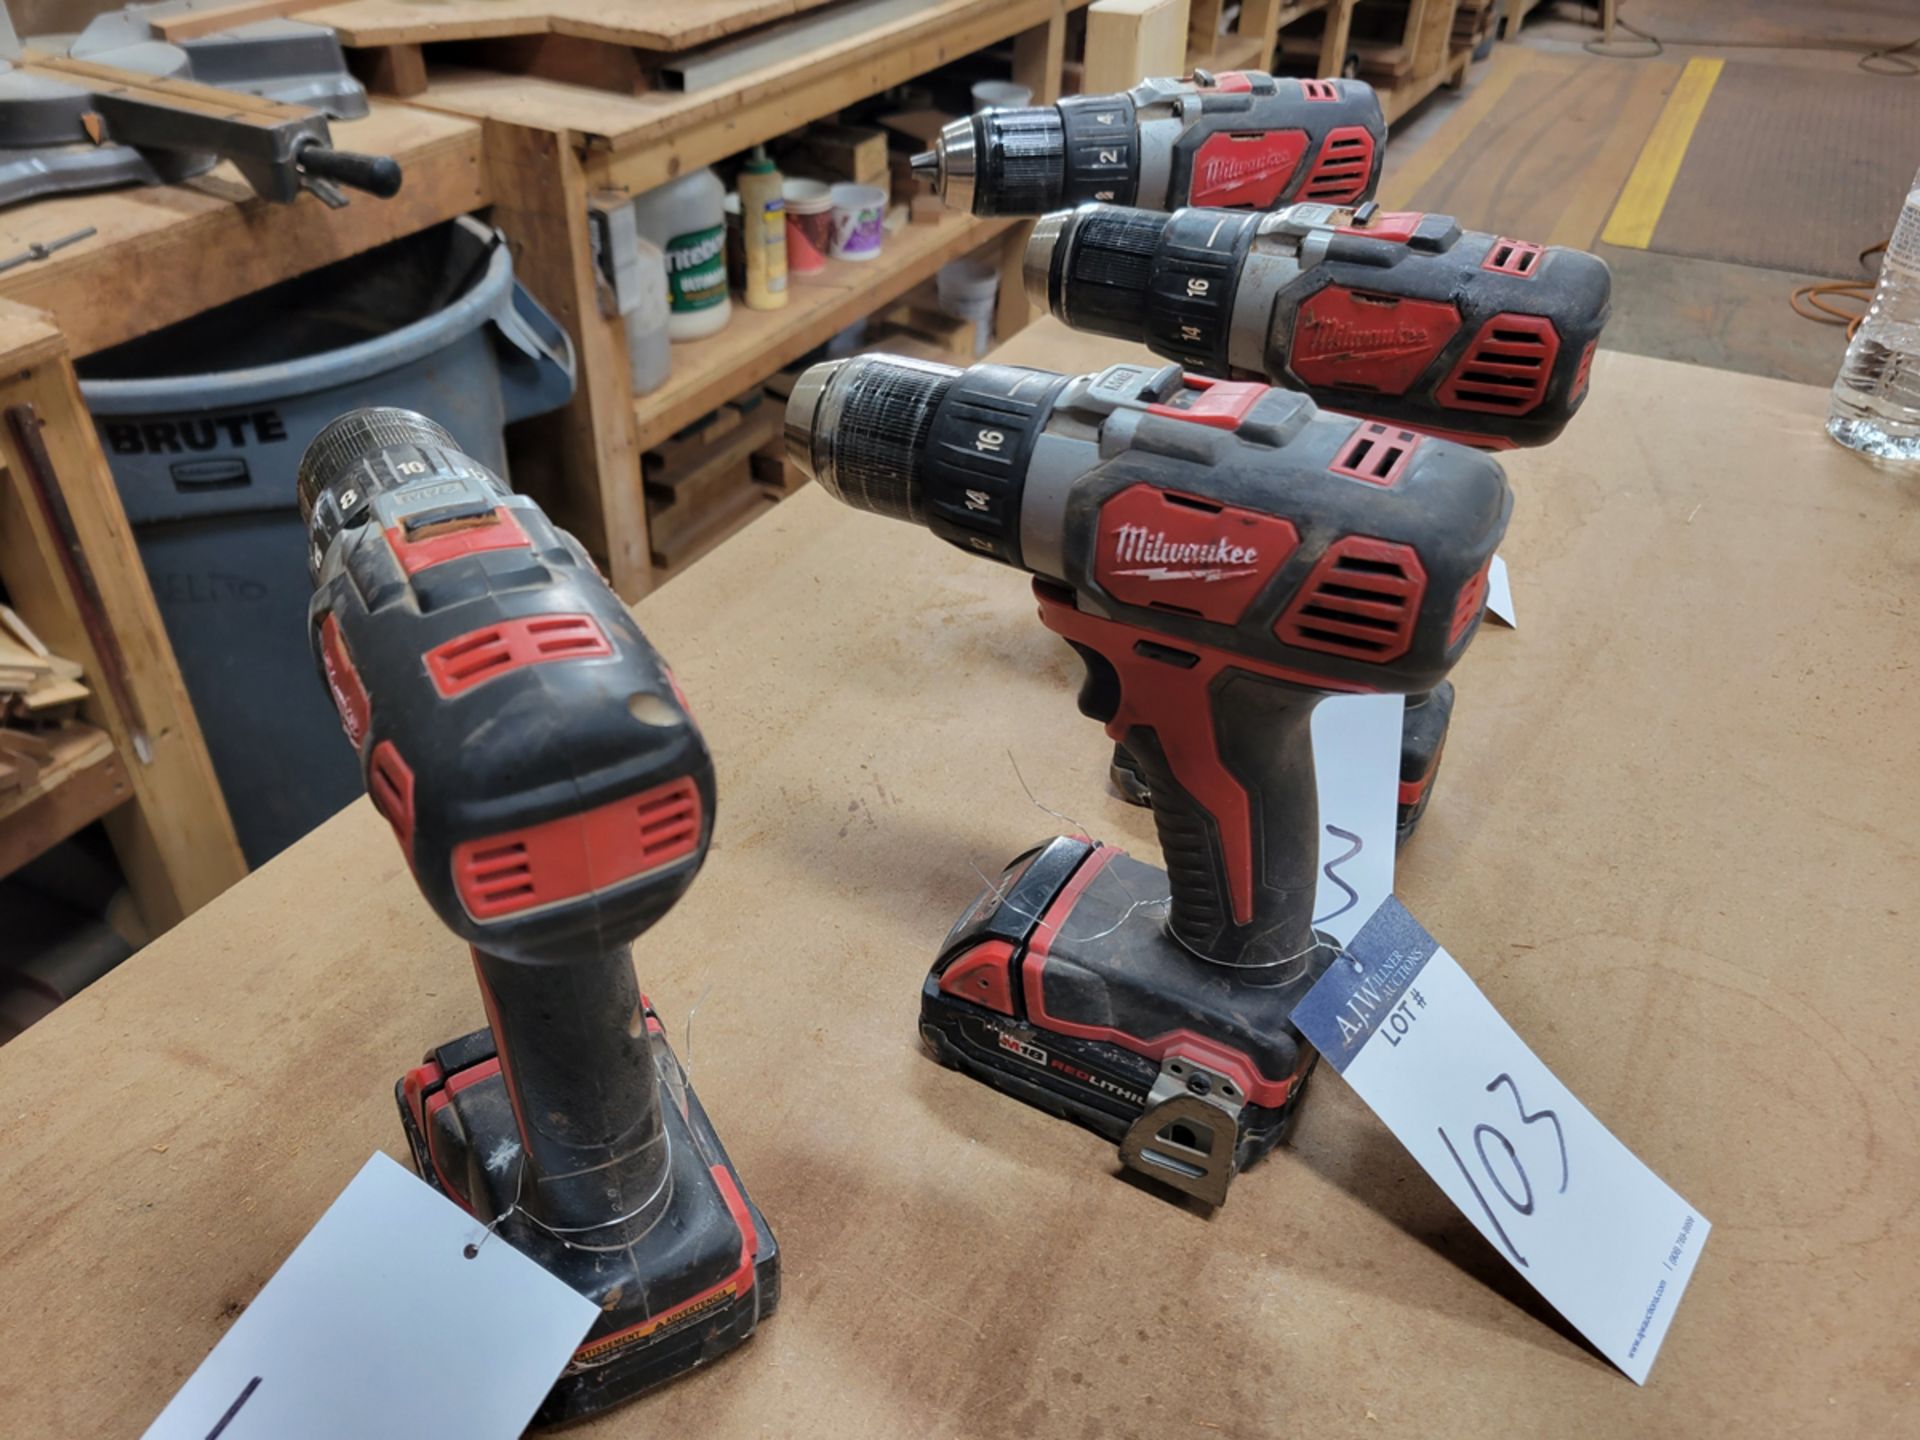 {EACH} (4) Milwaukee 18 Volt 1/2" Drill Driver w/ Battery and Charger - Image 2 of 3